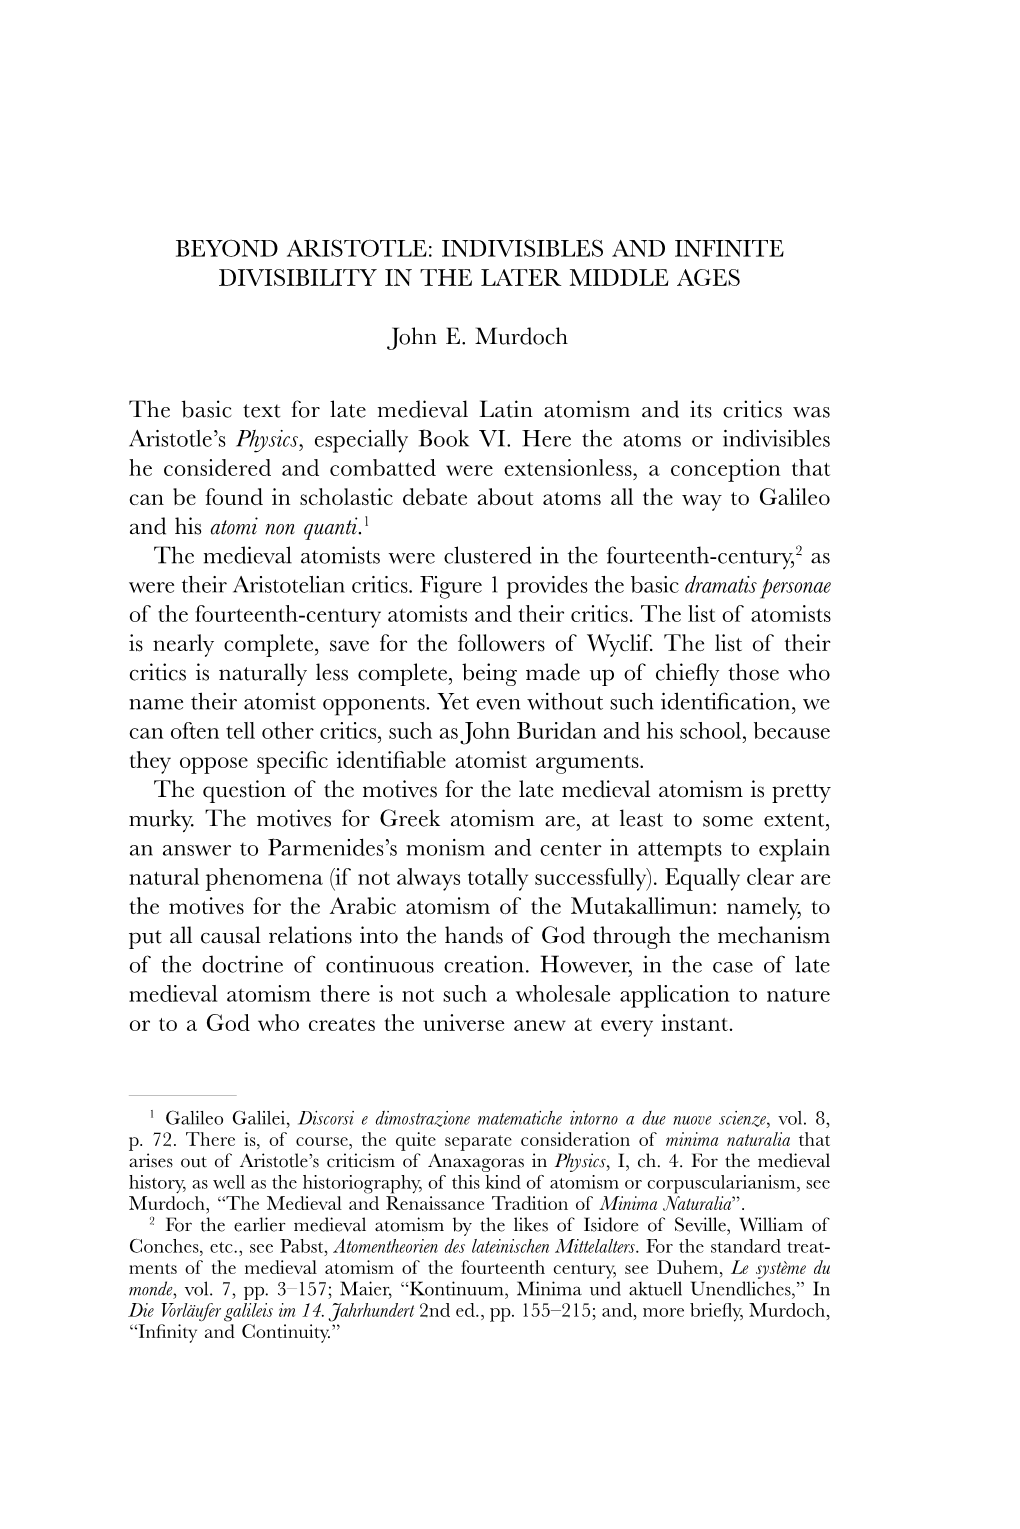 Beyond Aristotle: Indivisibles and Infinite Divisibility in the Later Middle Ages